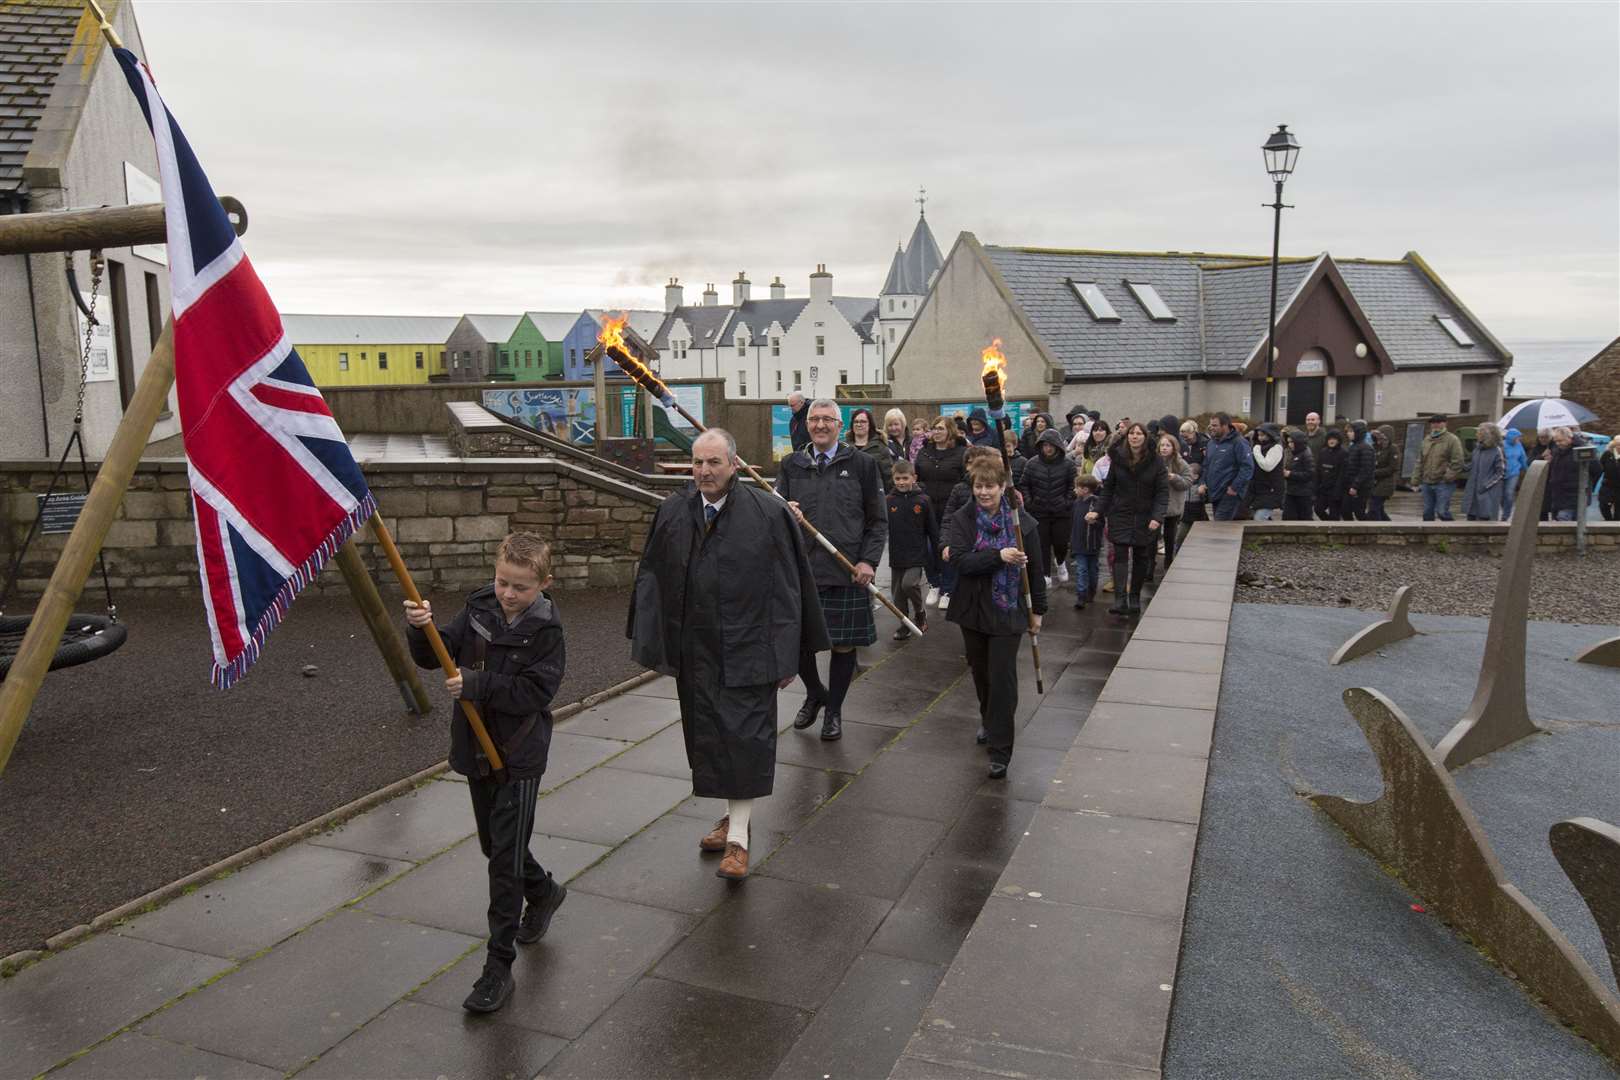 The procession makes its way towards the forge at John O'Groats, with 10-year-old Kyle Manson carrying the colours. Picture: Robert MacDonald / Northern Studios